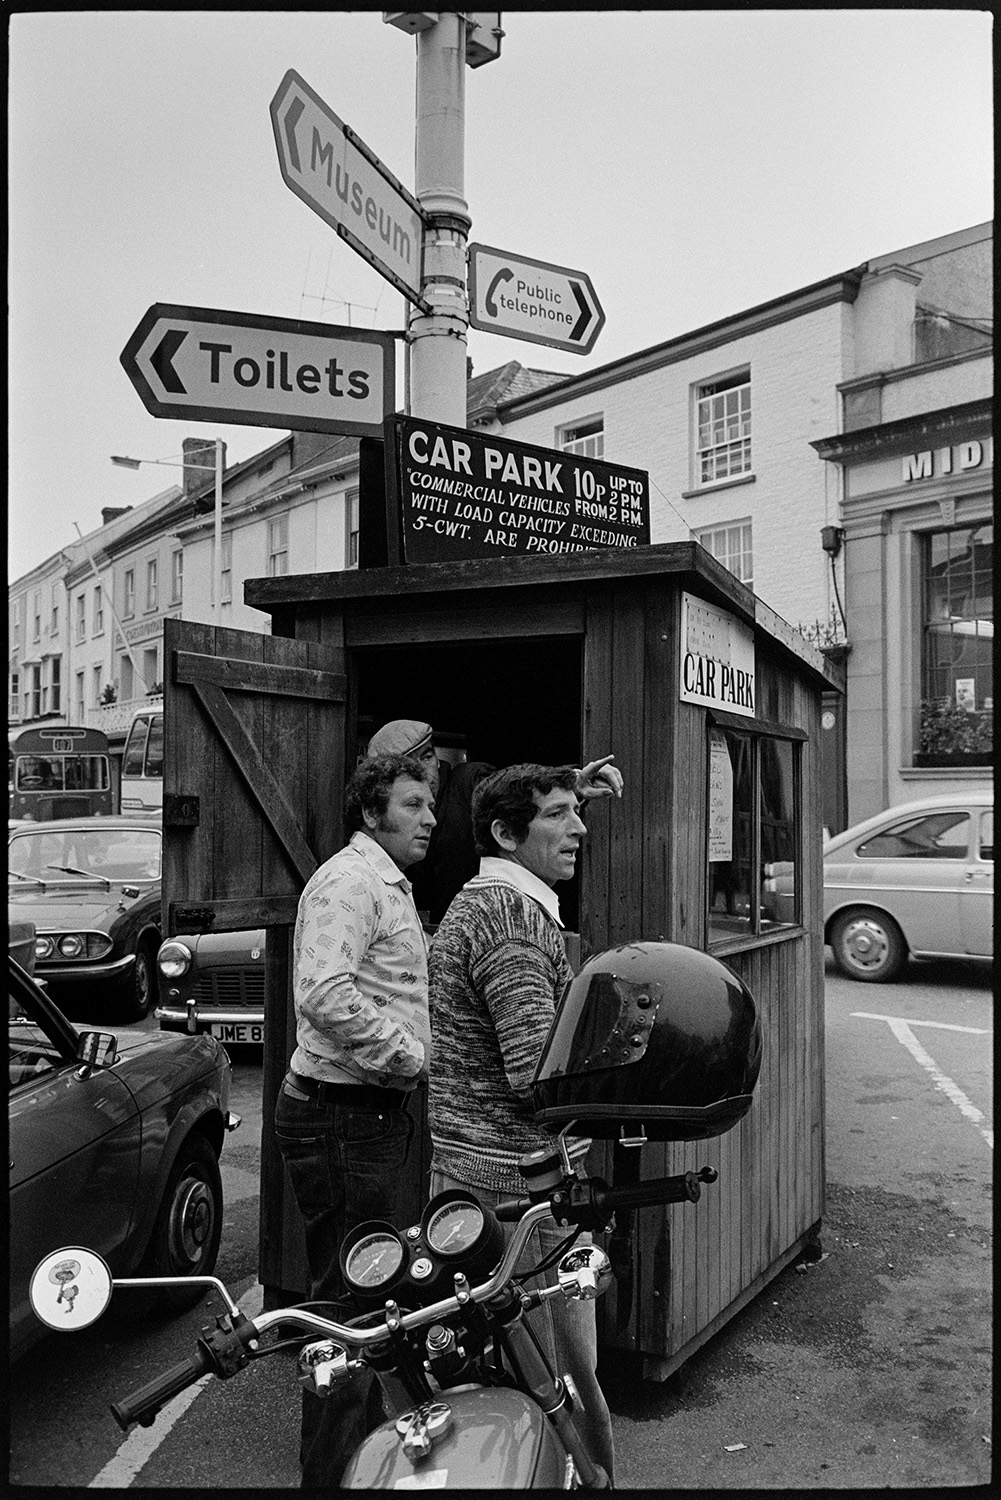 Car park attendant and hut in town square with road signs. 
[A car park attendant giving directions to two men  from his wooden hut in the car park in South Molton town square. A signpost is above the wooden hut.]